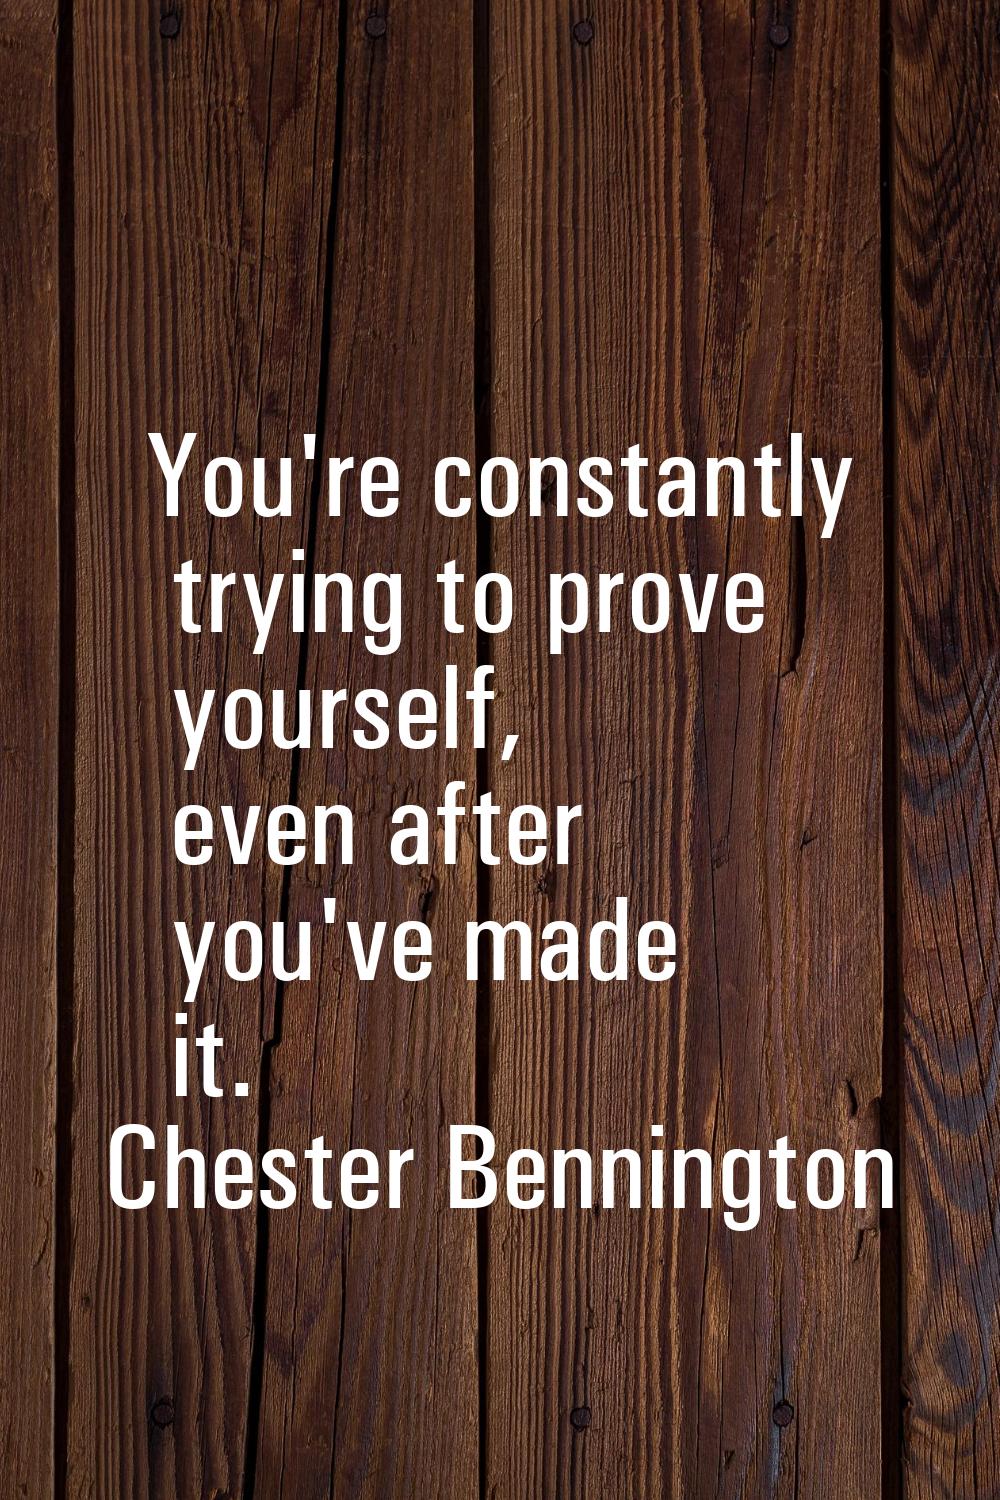 You're constantly trying to prove yourself, even after you've made it.